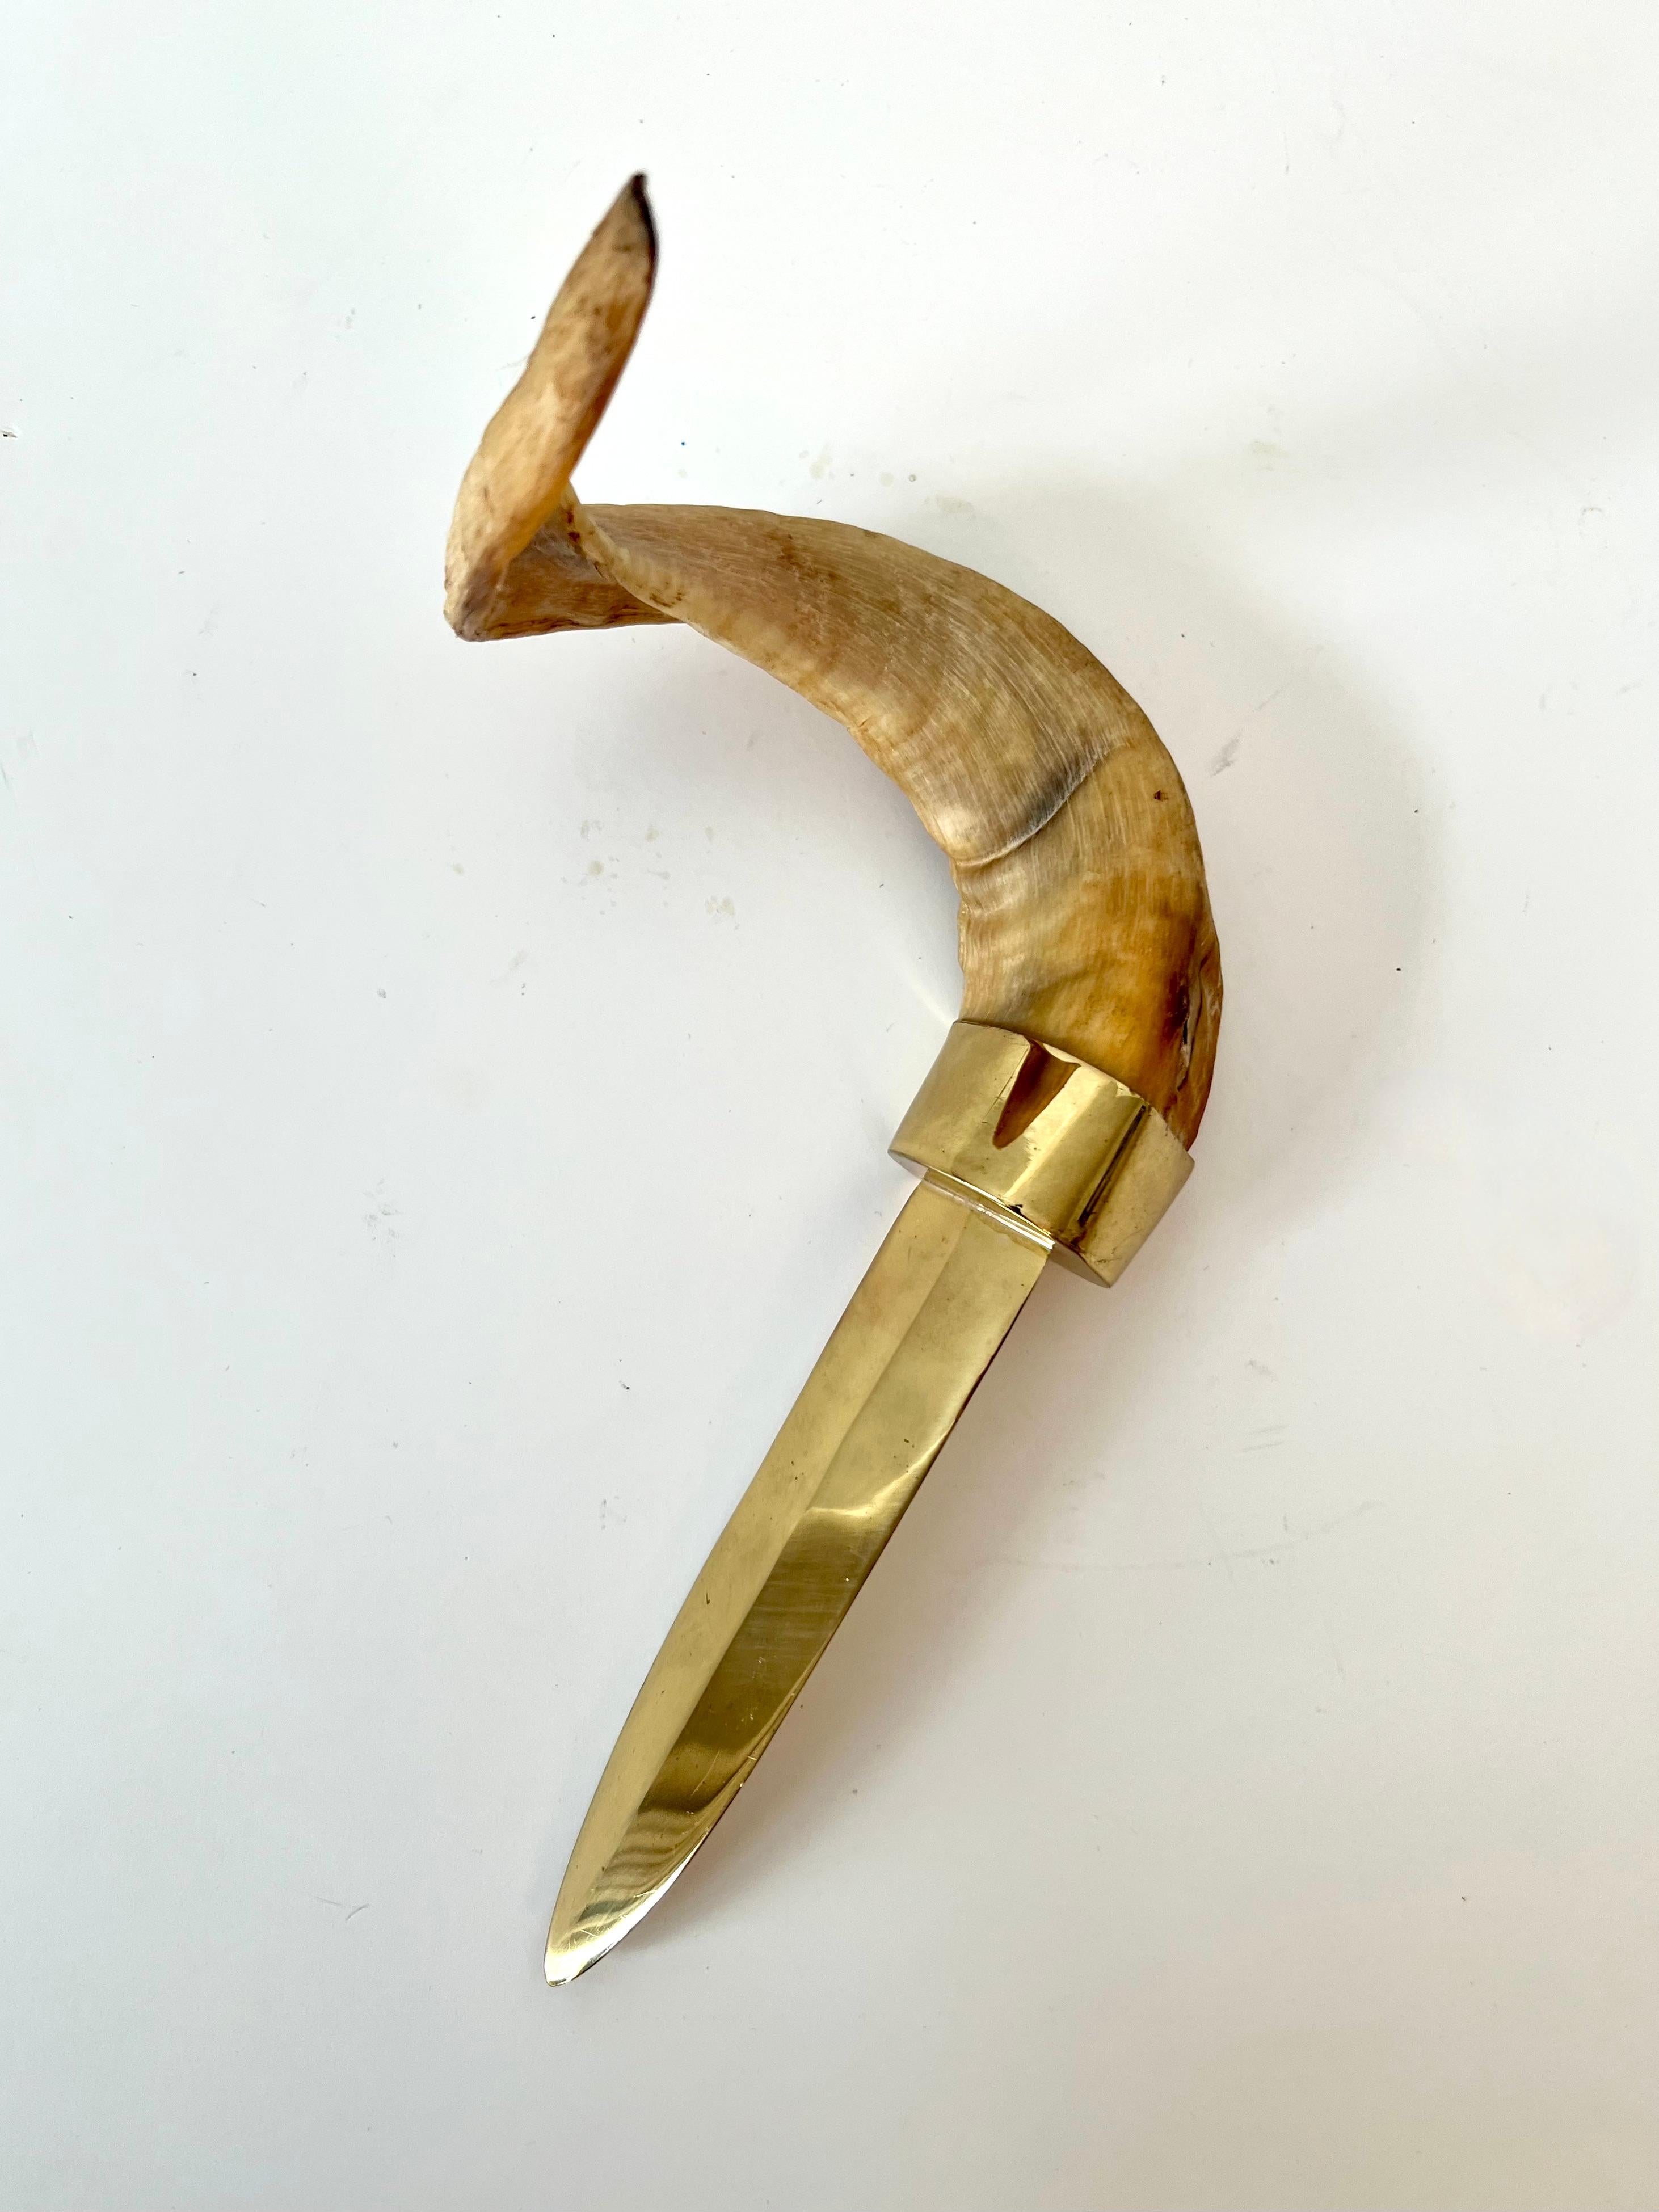 a stunning and large letter opener in brass with a horn handle.  The piece is impressive and shines bright.  A compliment to many settings - a funcktional piece of art on any desk or work station.

The piece would be a great graduation gift, wedding